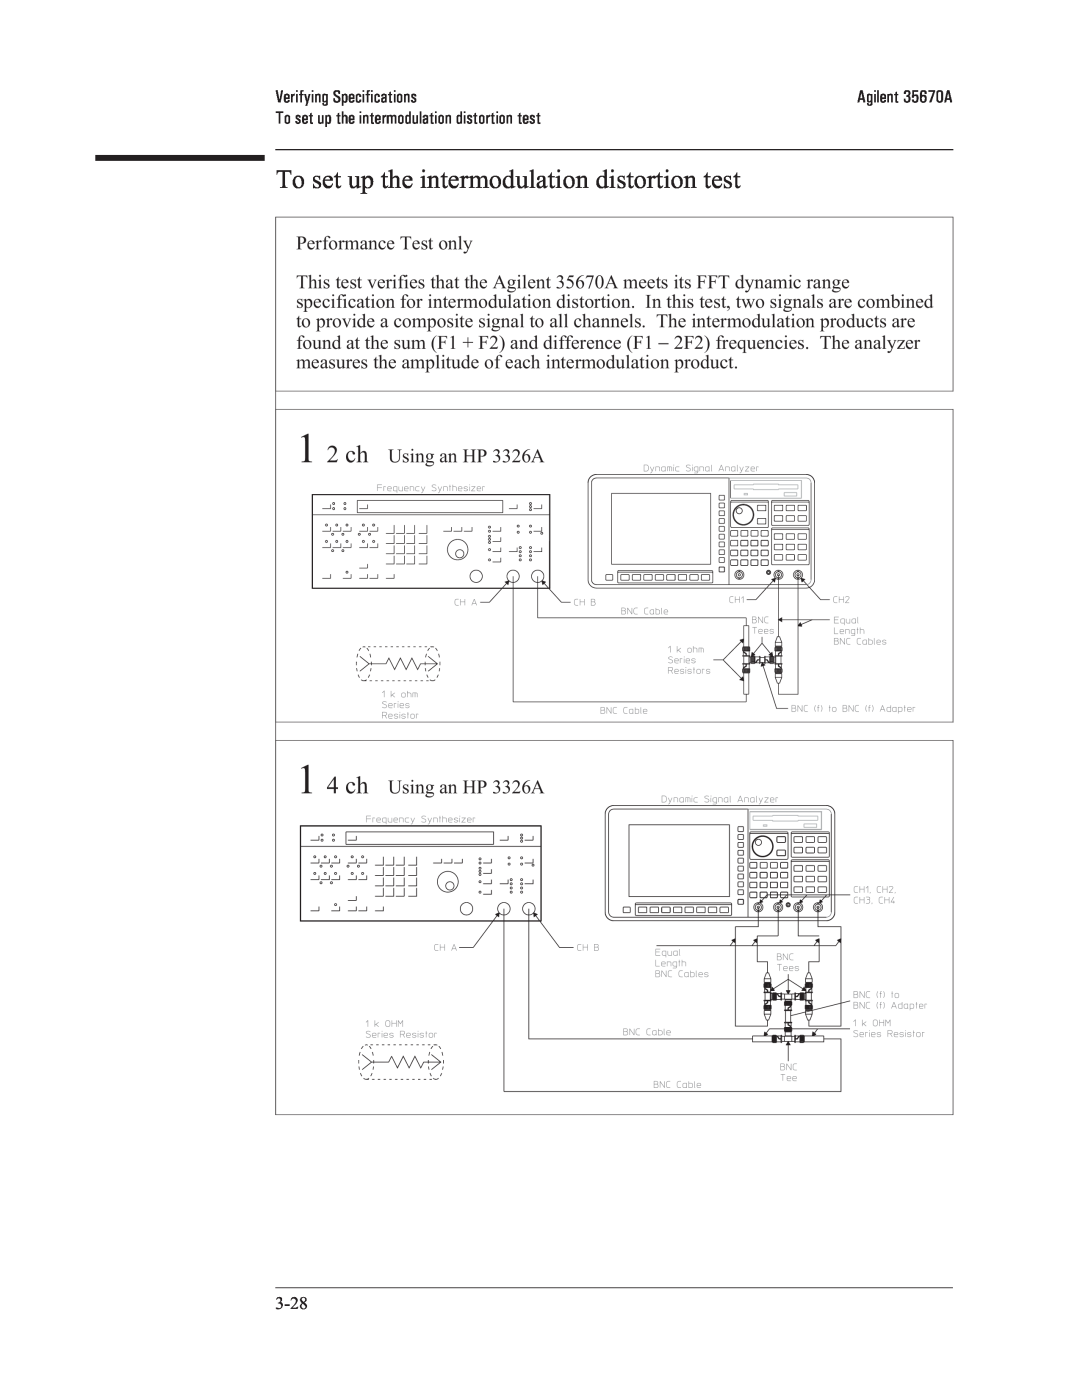 Agilent Technologies 35670-90066 manual To set up the intermodulation distortion test, 1 2 ch, 1 4 ch 